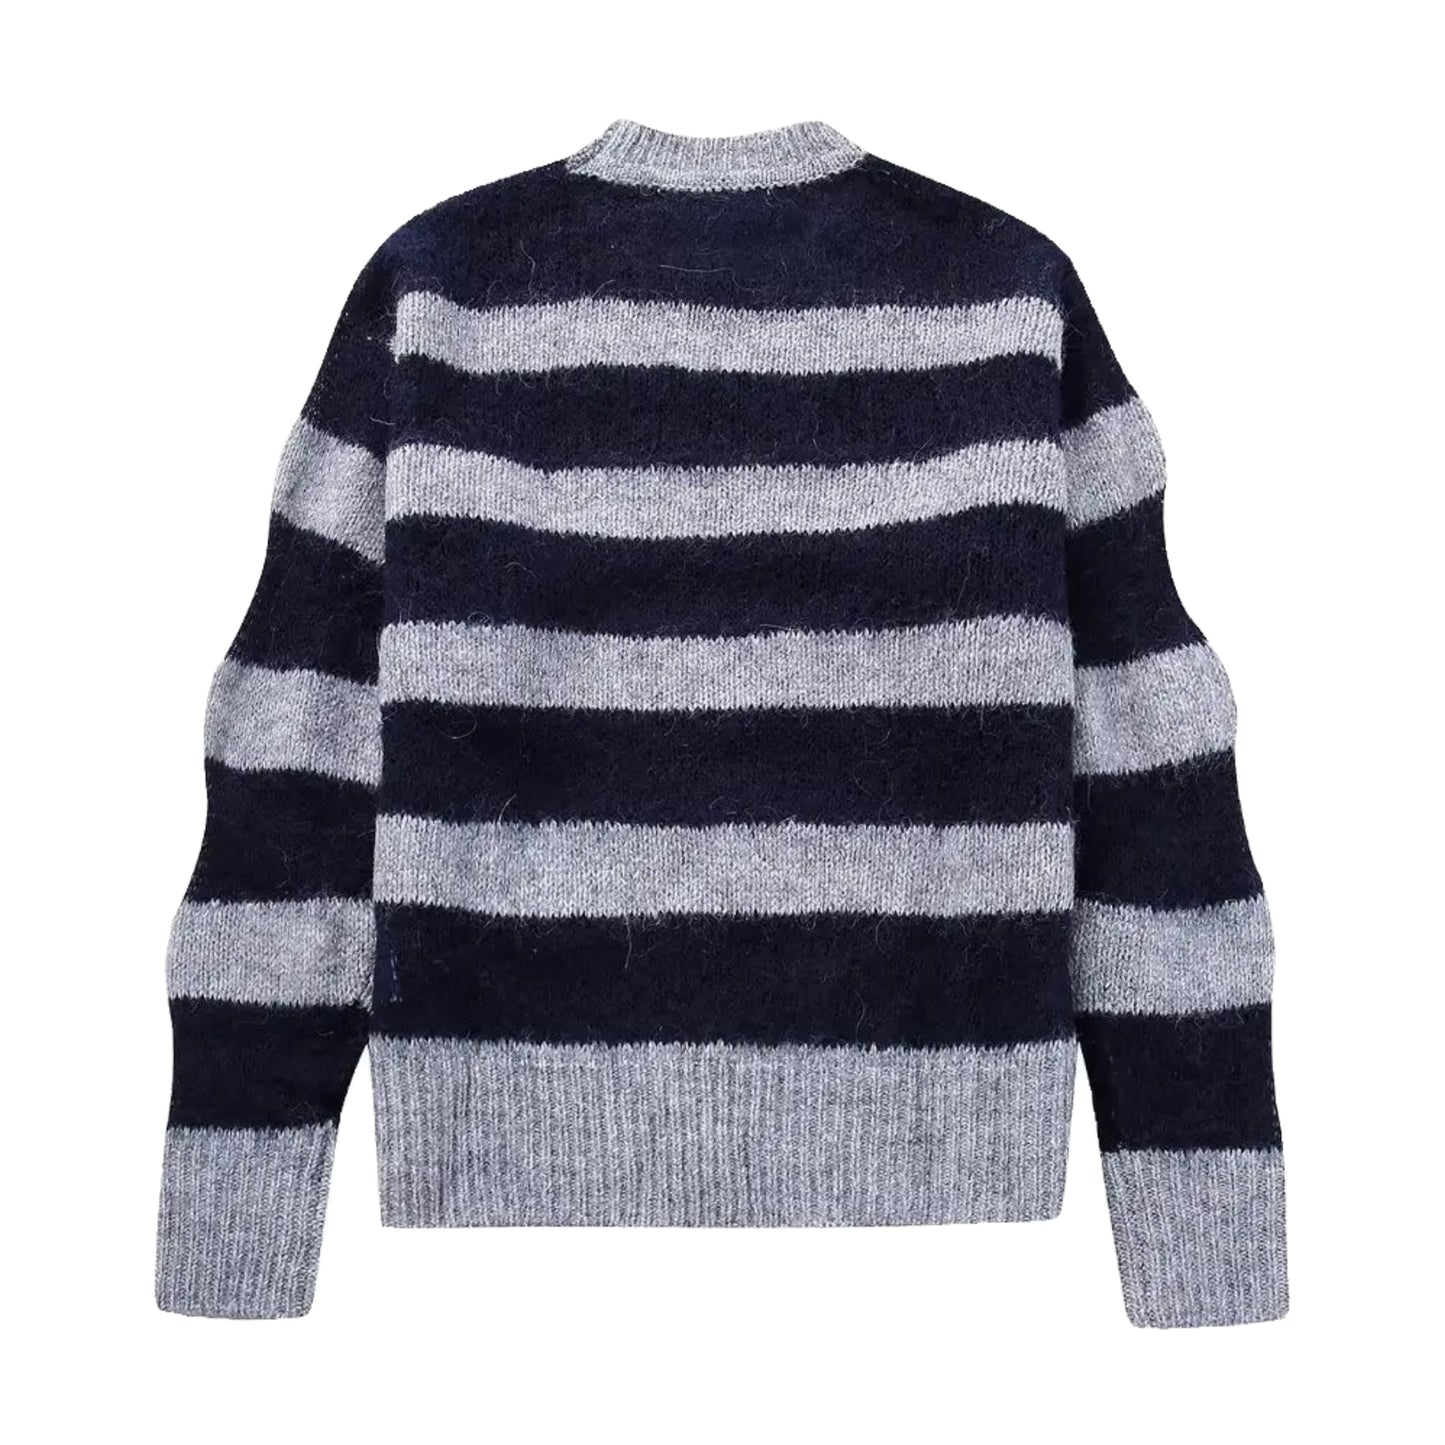 Gray & Black Knit Striped Pull Over Sweater